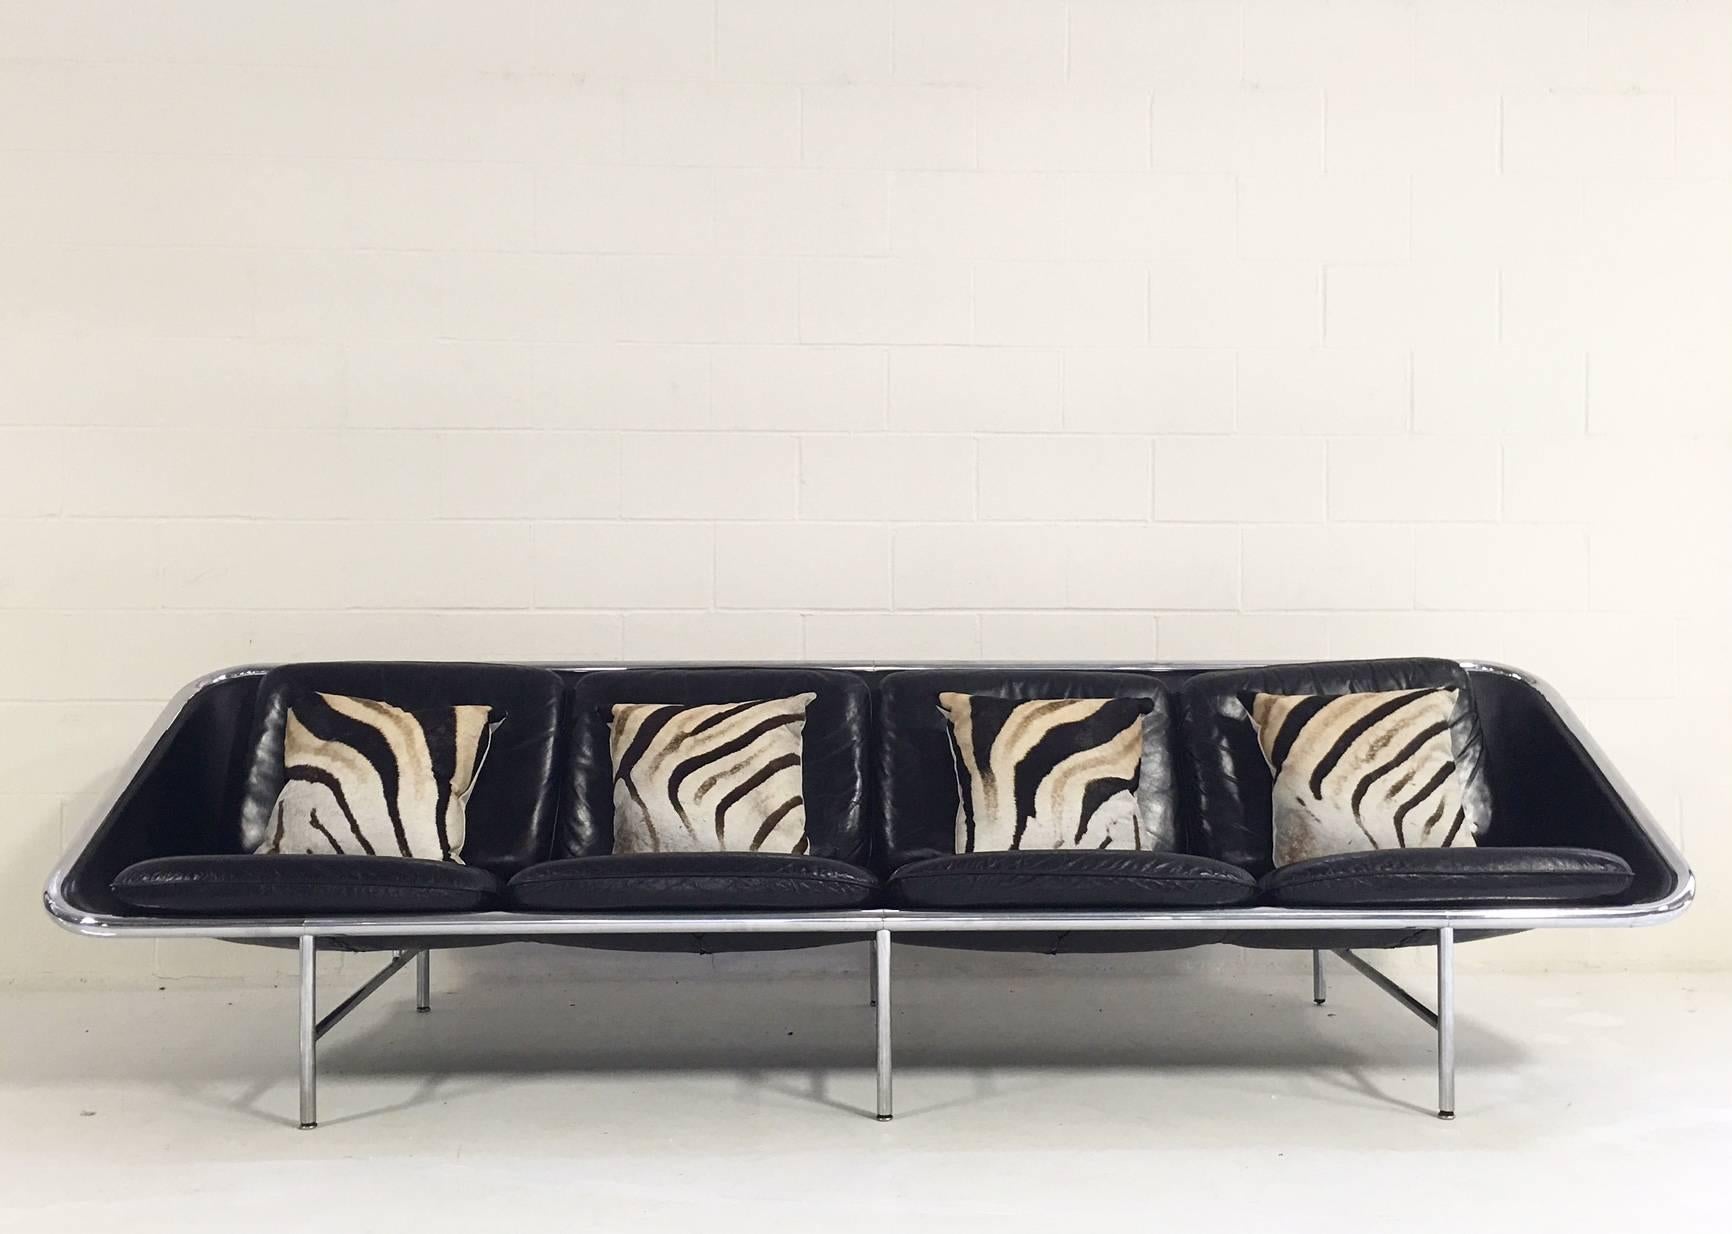 An exceptional piece of Mid-Century design. We fell in love with the exquisite lines of this Model 6833 Leather Sling Sofa by George Nelson for Herman Miller. We added four of our beautifully handcrafted zebra hide pillows for texture and pattern.